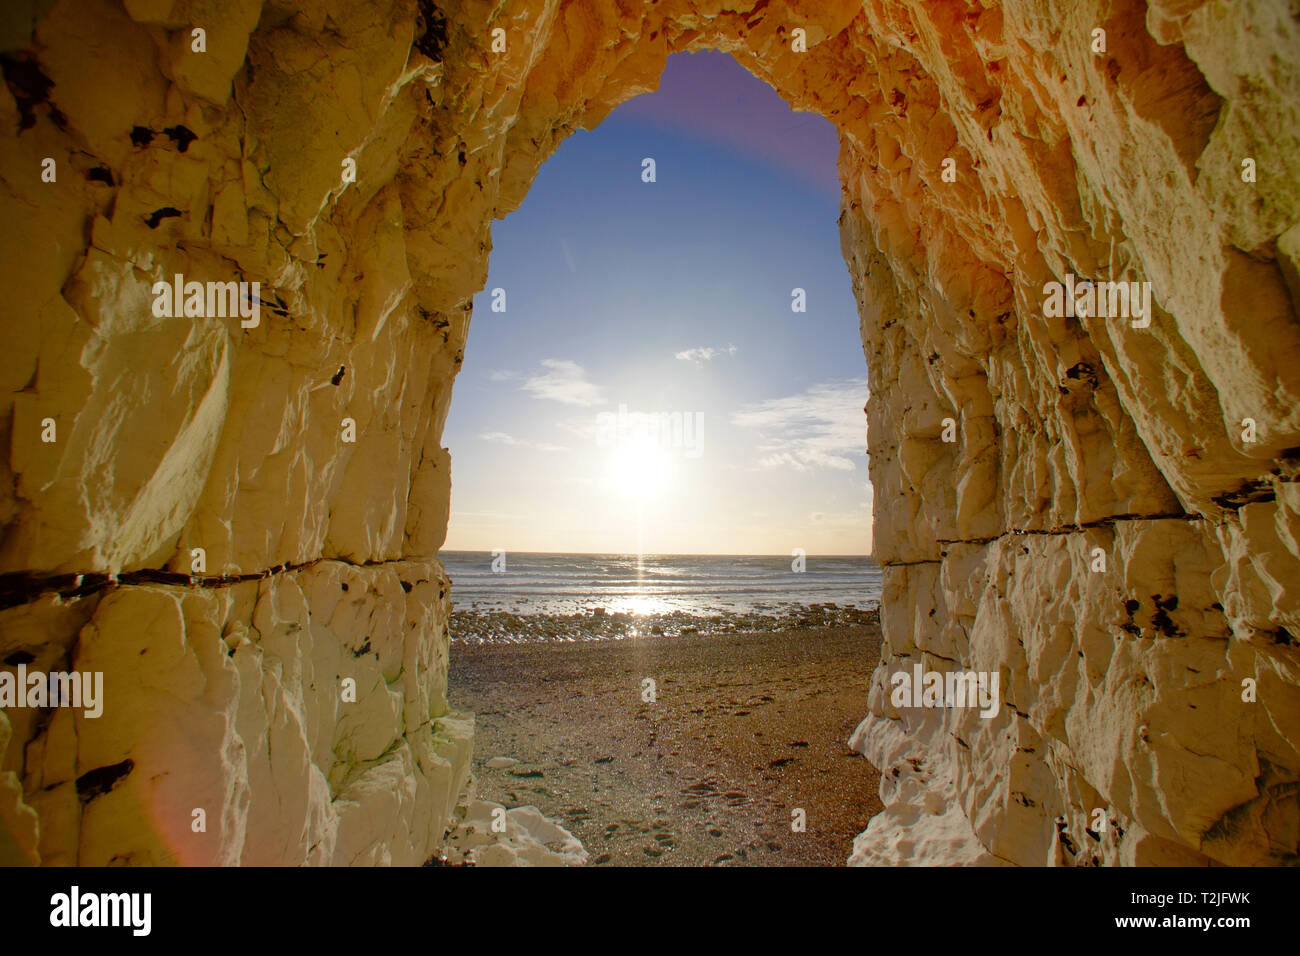 View of a sunset from a cave in the chalk cliffs near Beachy Head, Eastbourne, East Sussex, UK Stock Photo